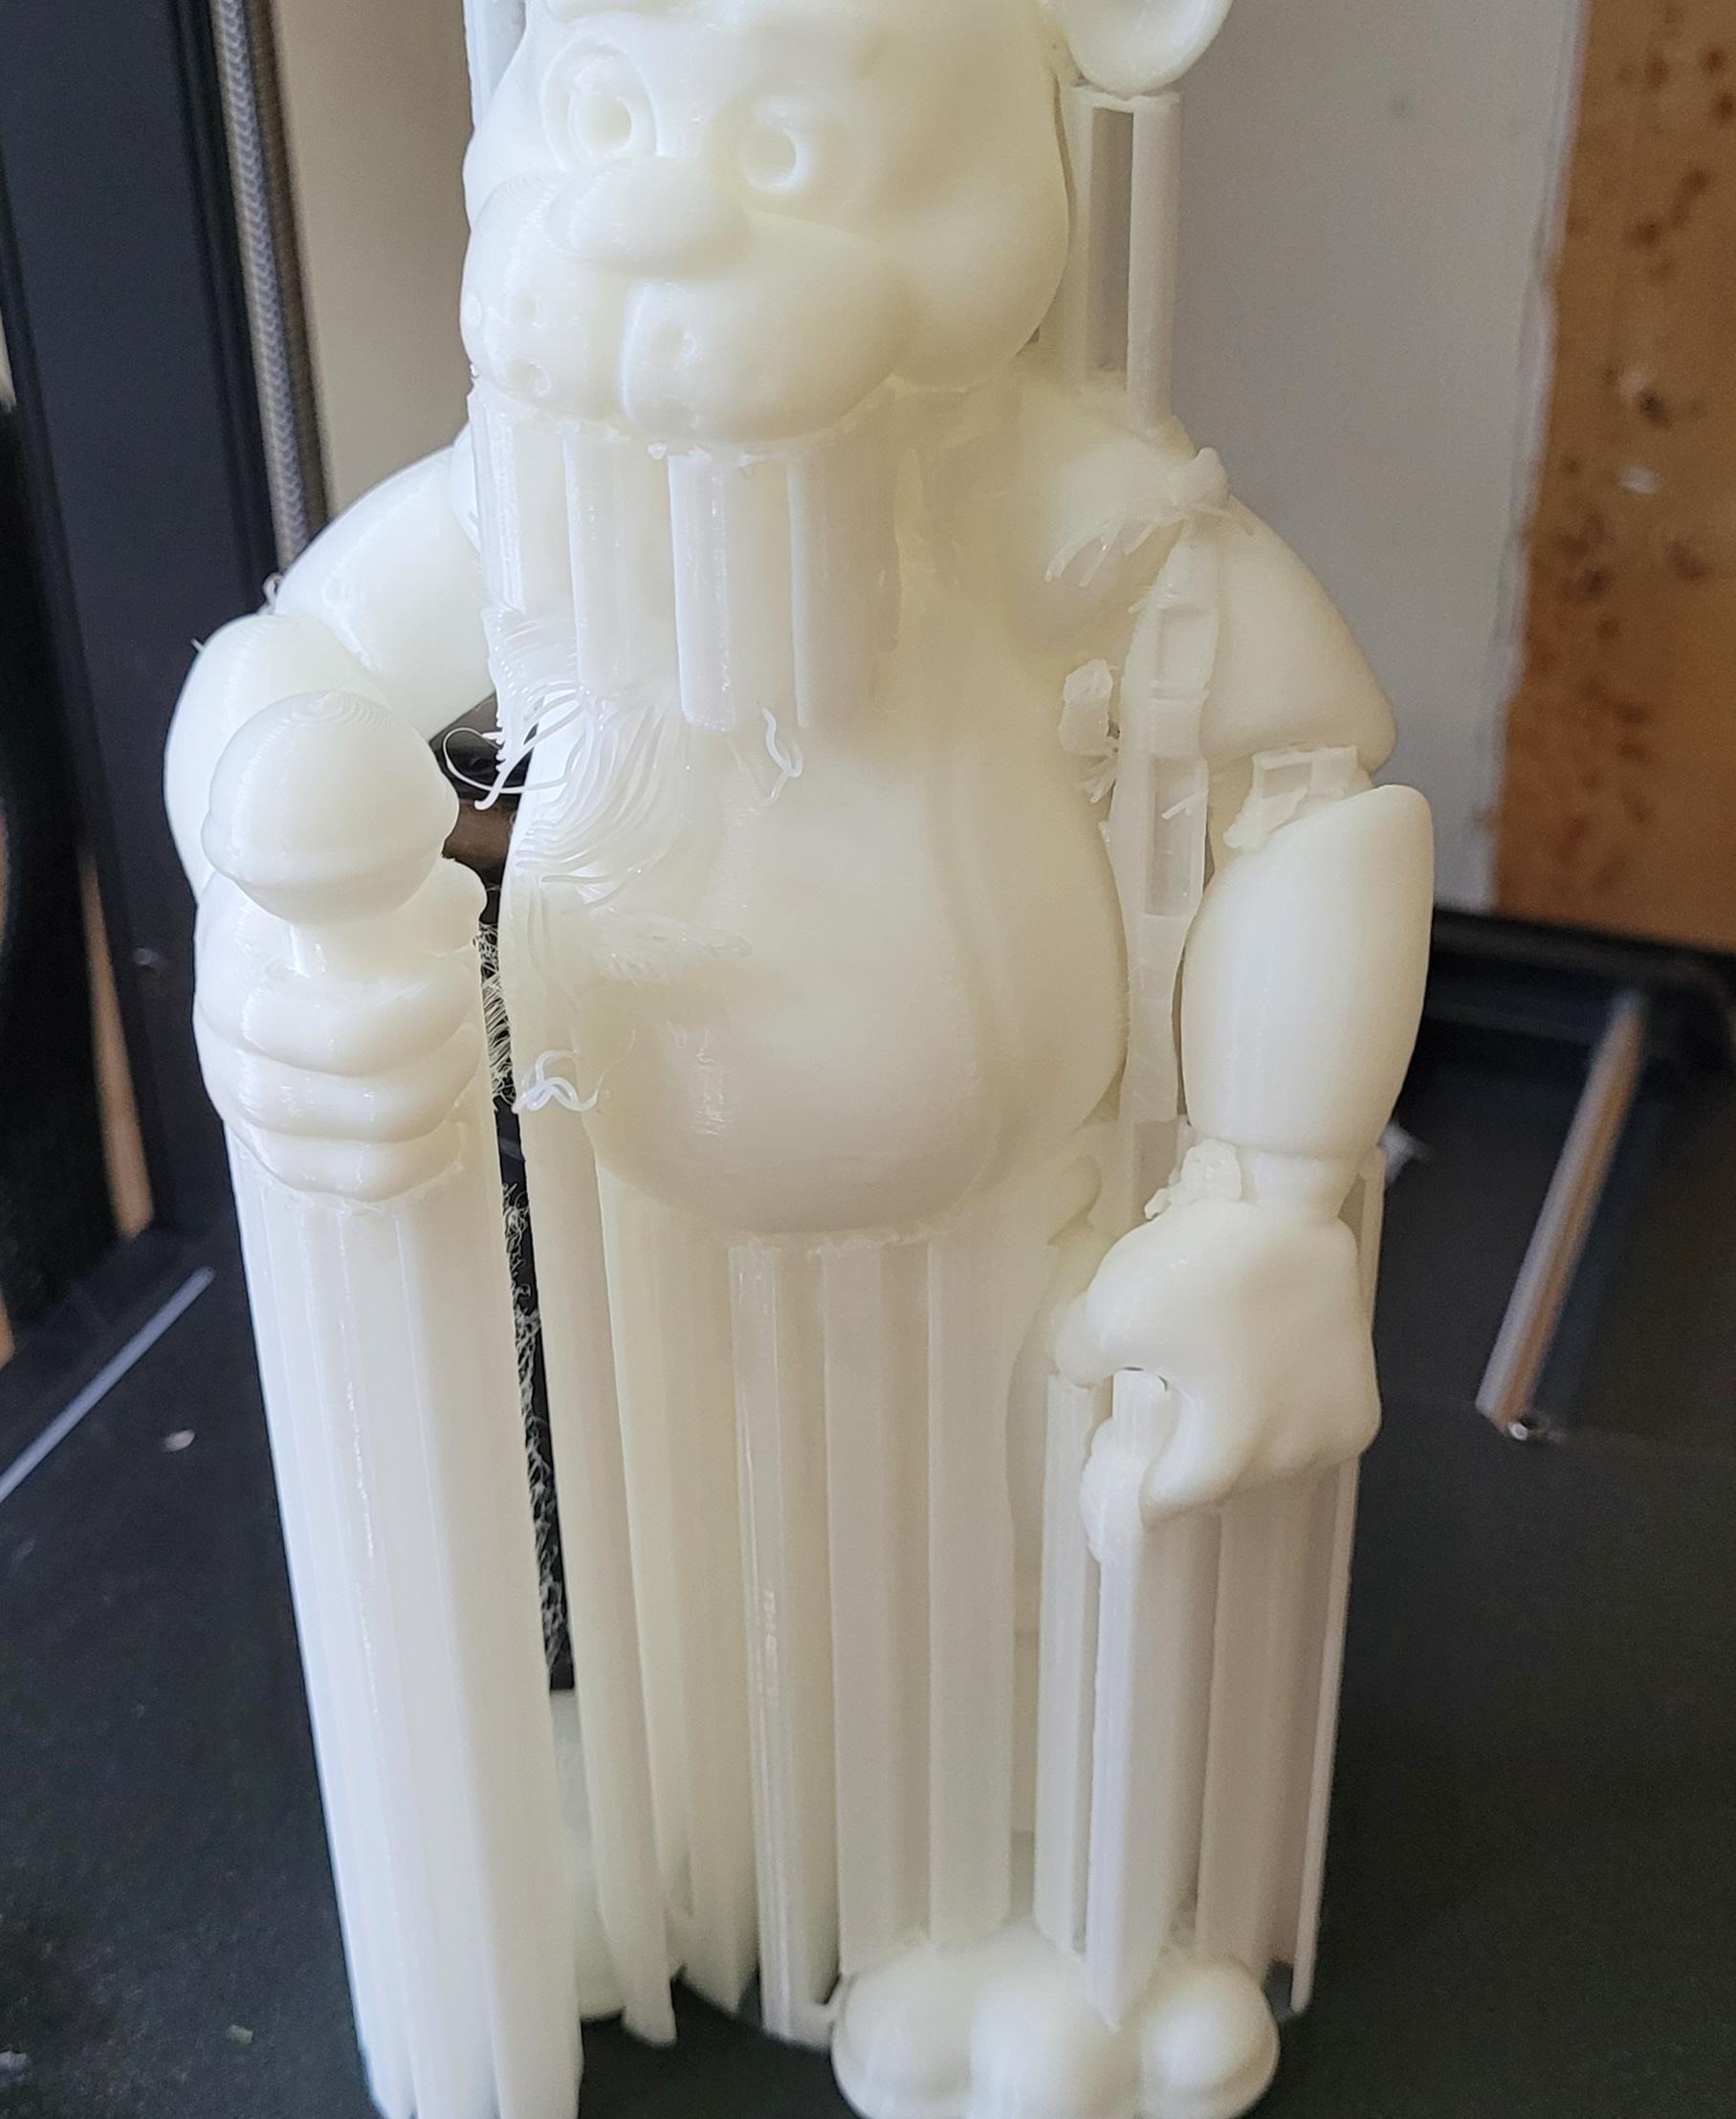 Freddy Fazbear - FNAF - Fan Art - Printed on an Ender 3 V3 SE, on default Standard Quality settings. The supports were NOT easy to remove but came off eventually. The mouth supports were the most difficult to remove, requiring the use of a thin screwdriver and pliers.
Once cleaned up this is a great model. - 3d model